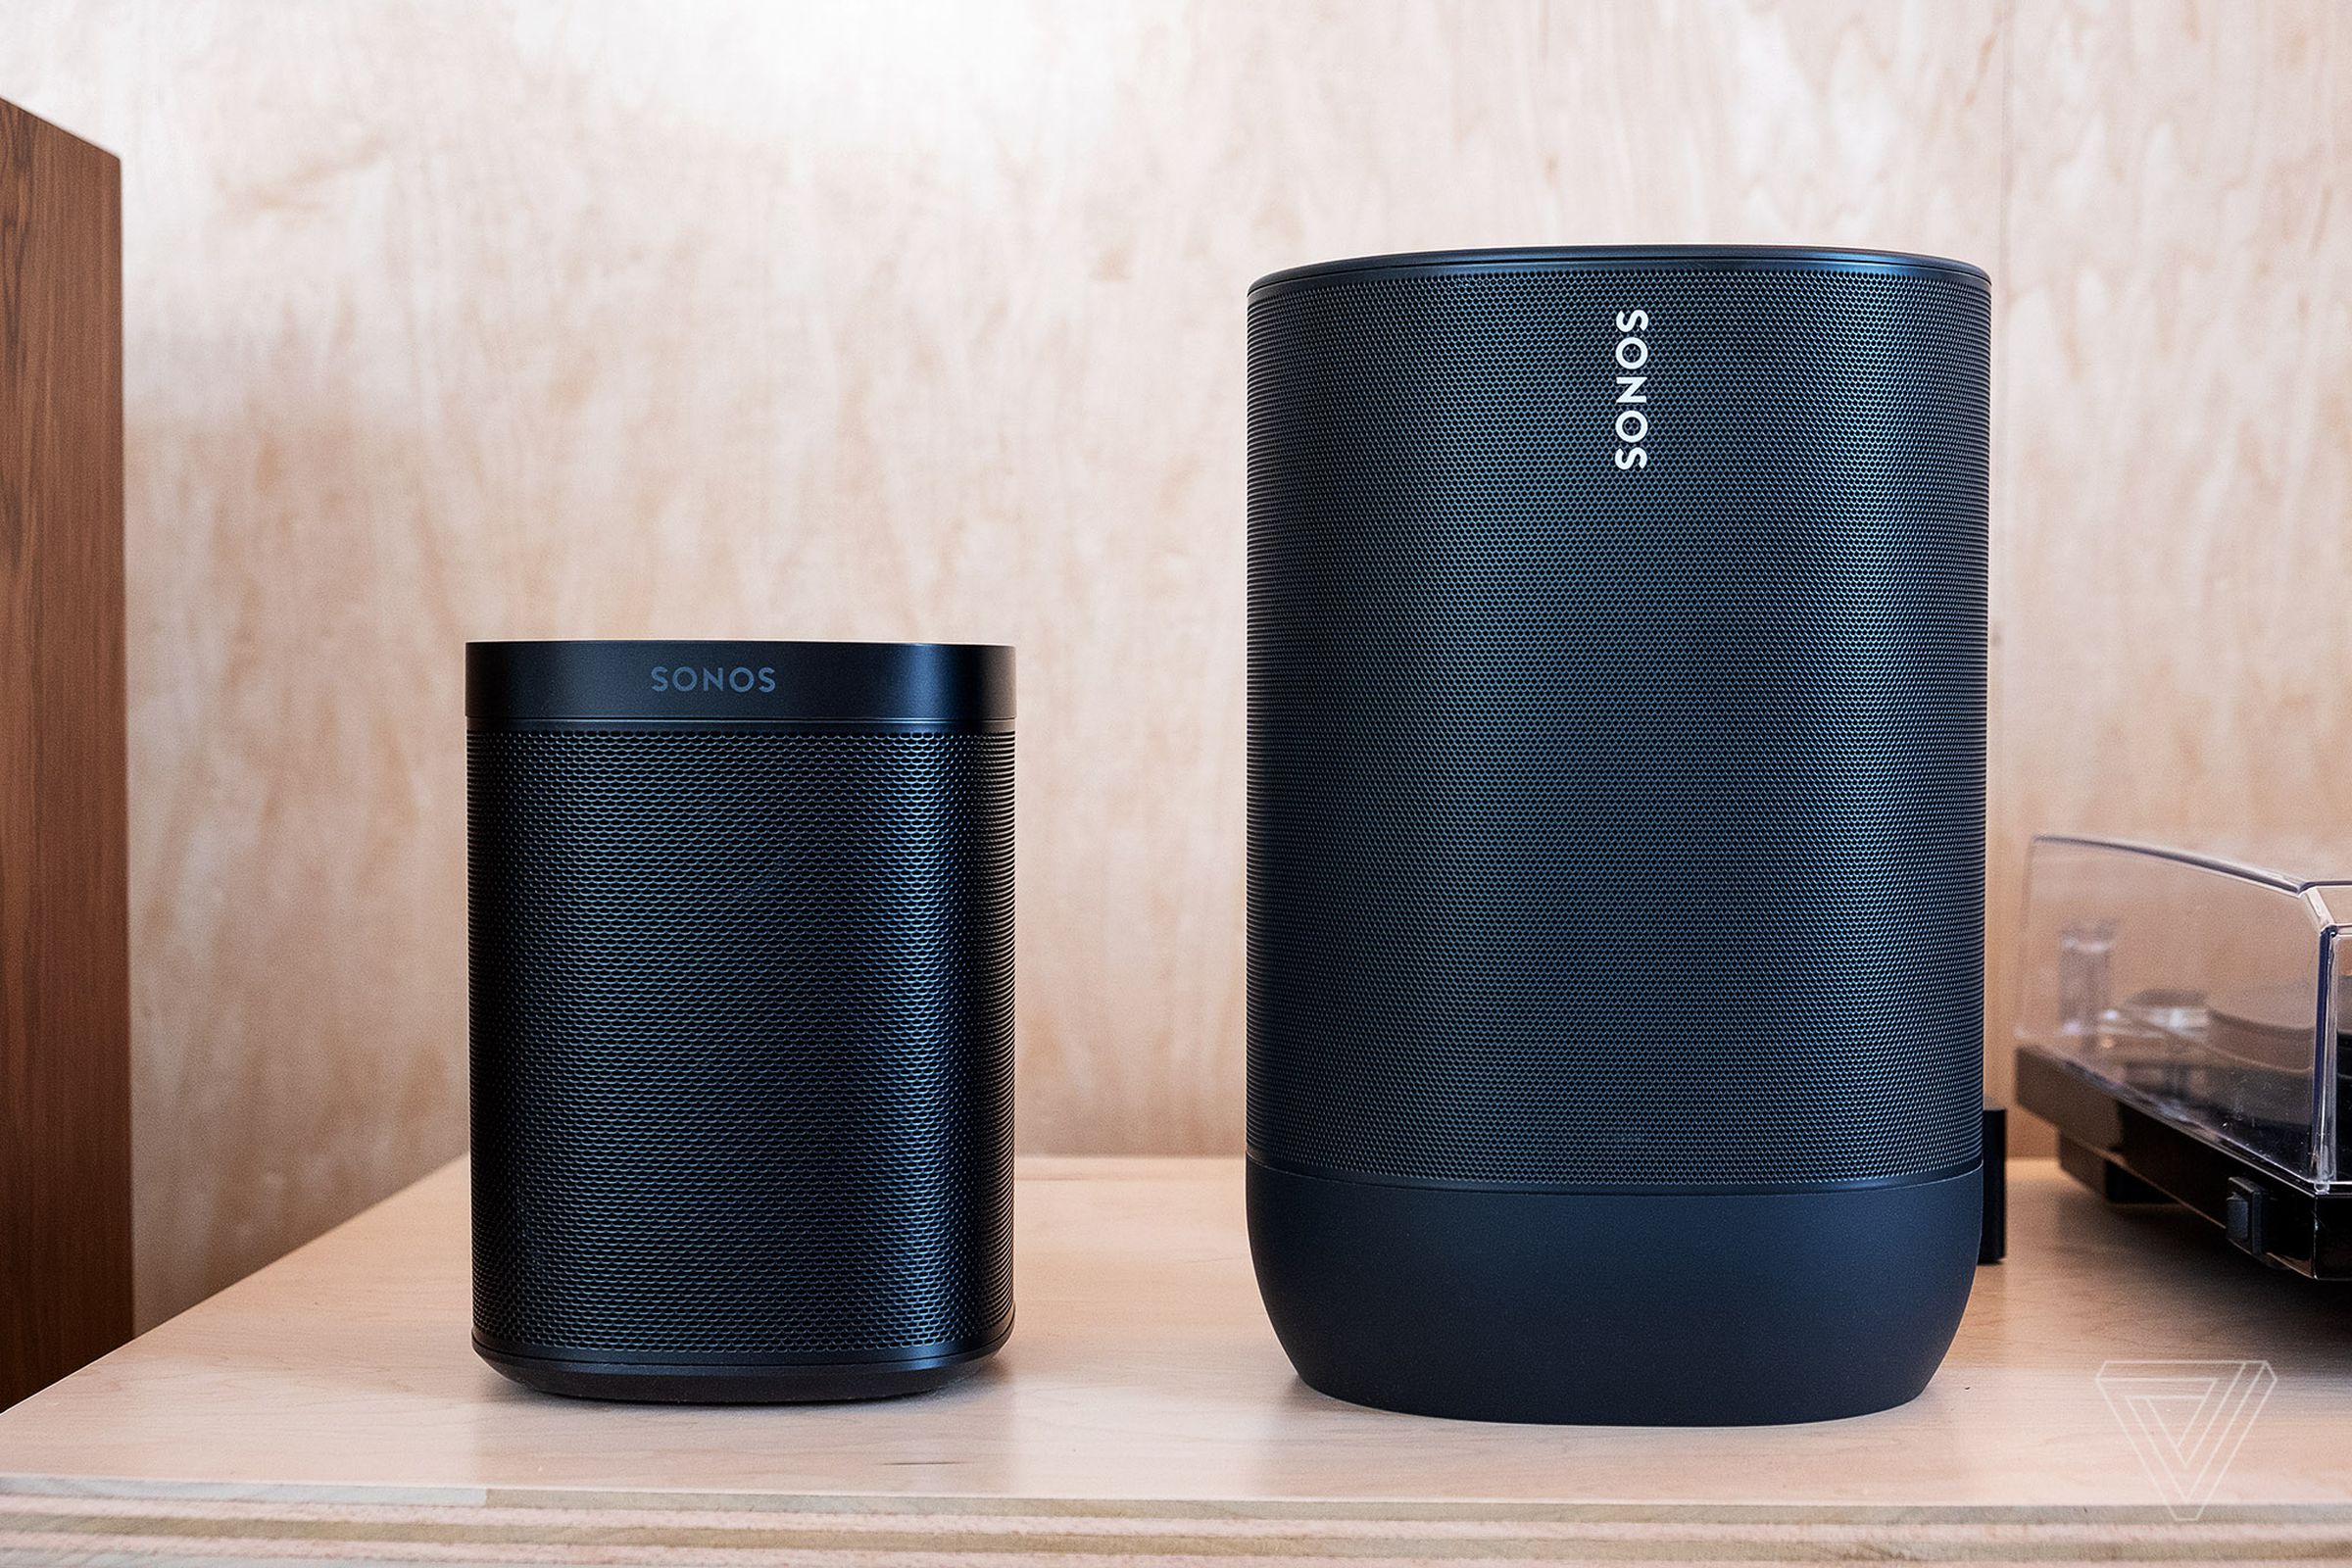 The Sonos Move (right) is much larger than the Sonos One.